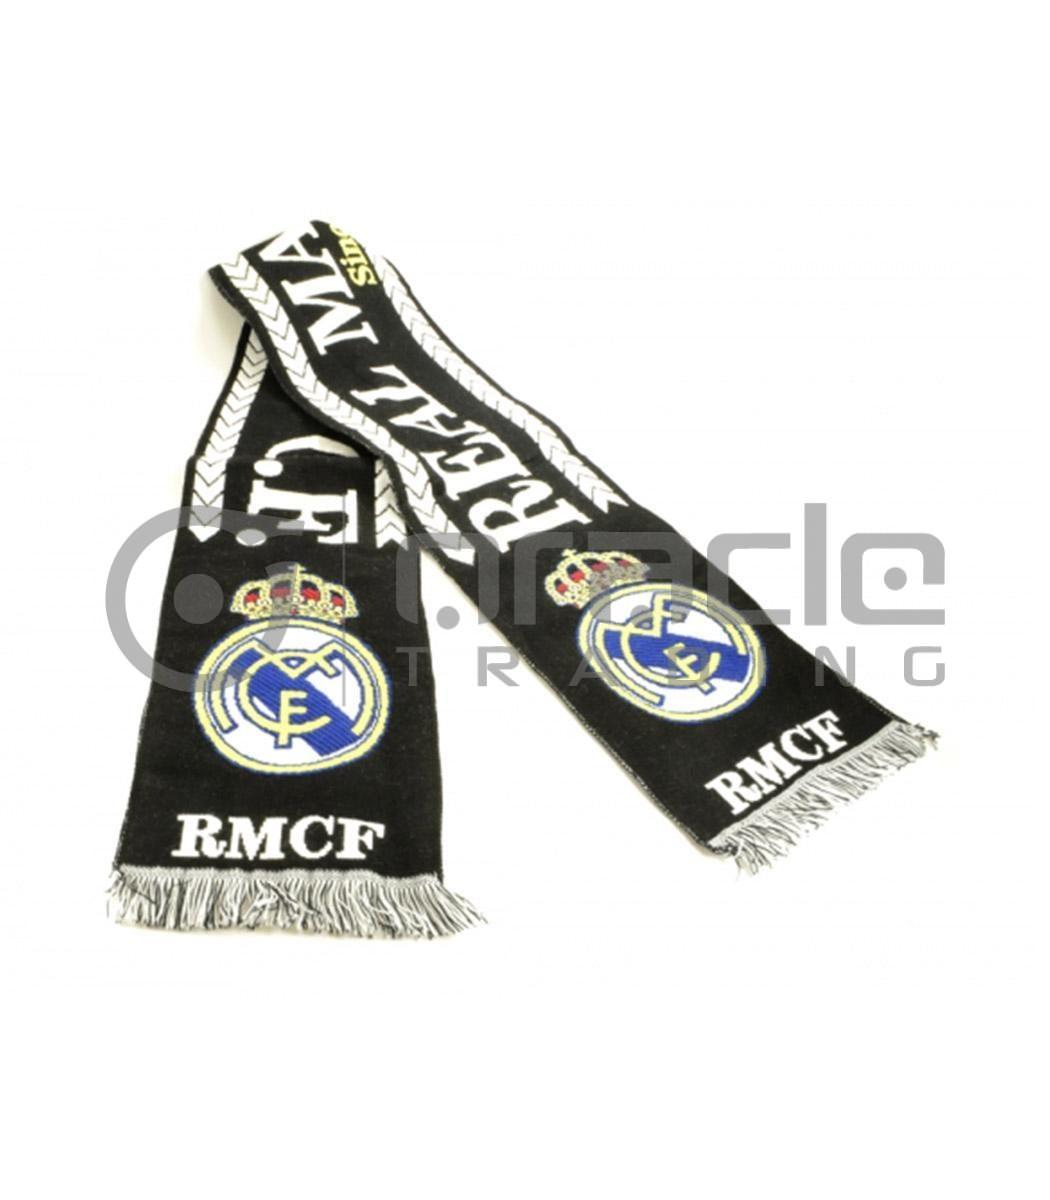 Real Madrid Knitted Scarf - Black - Made in Spain